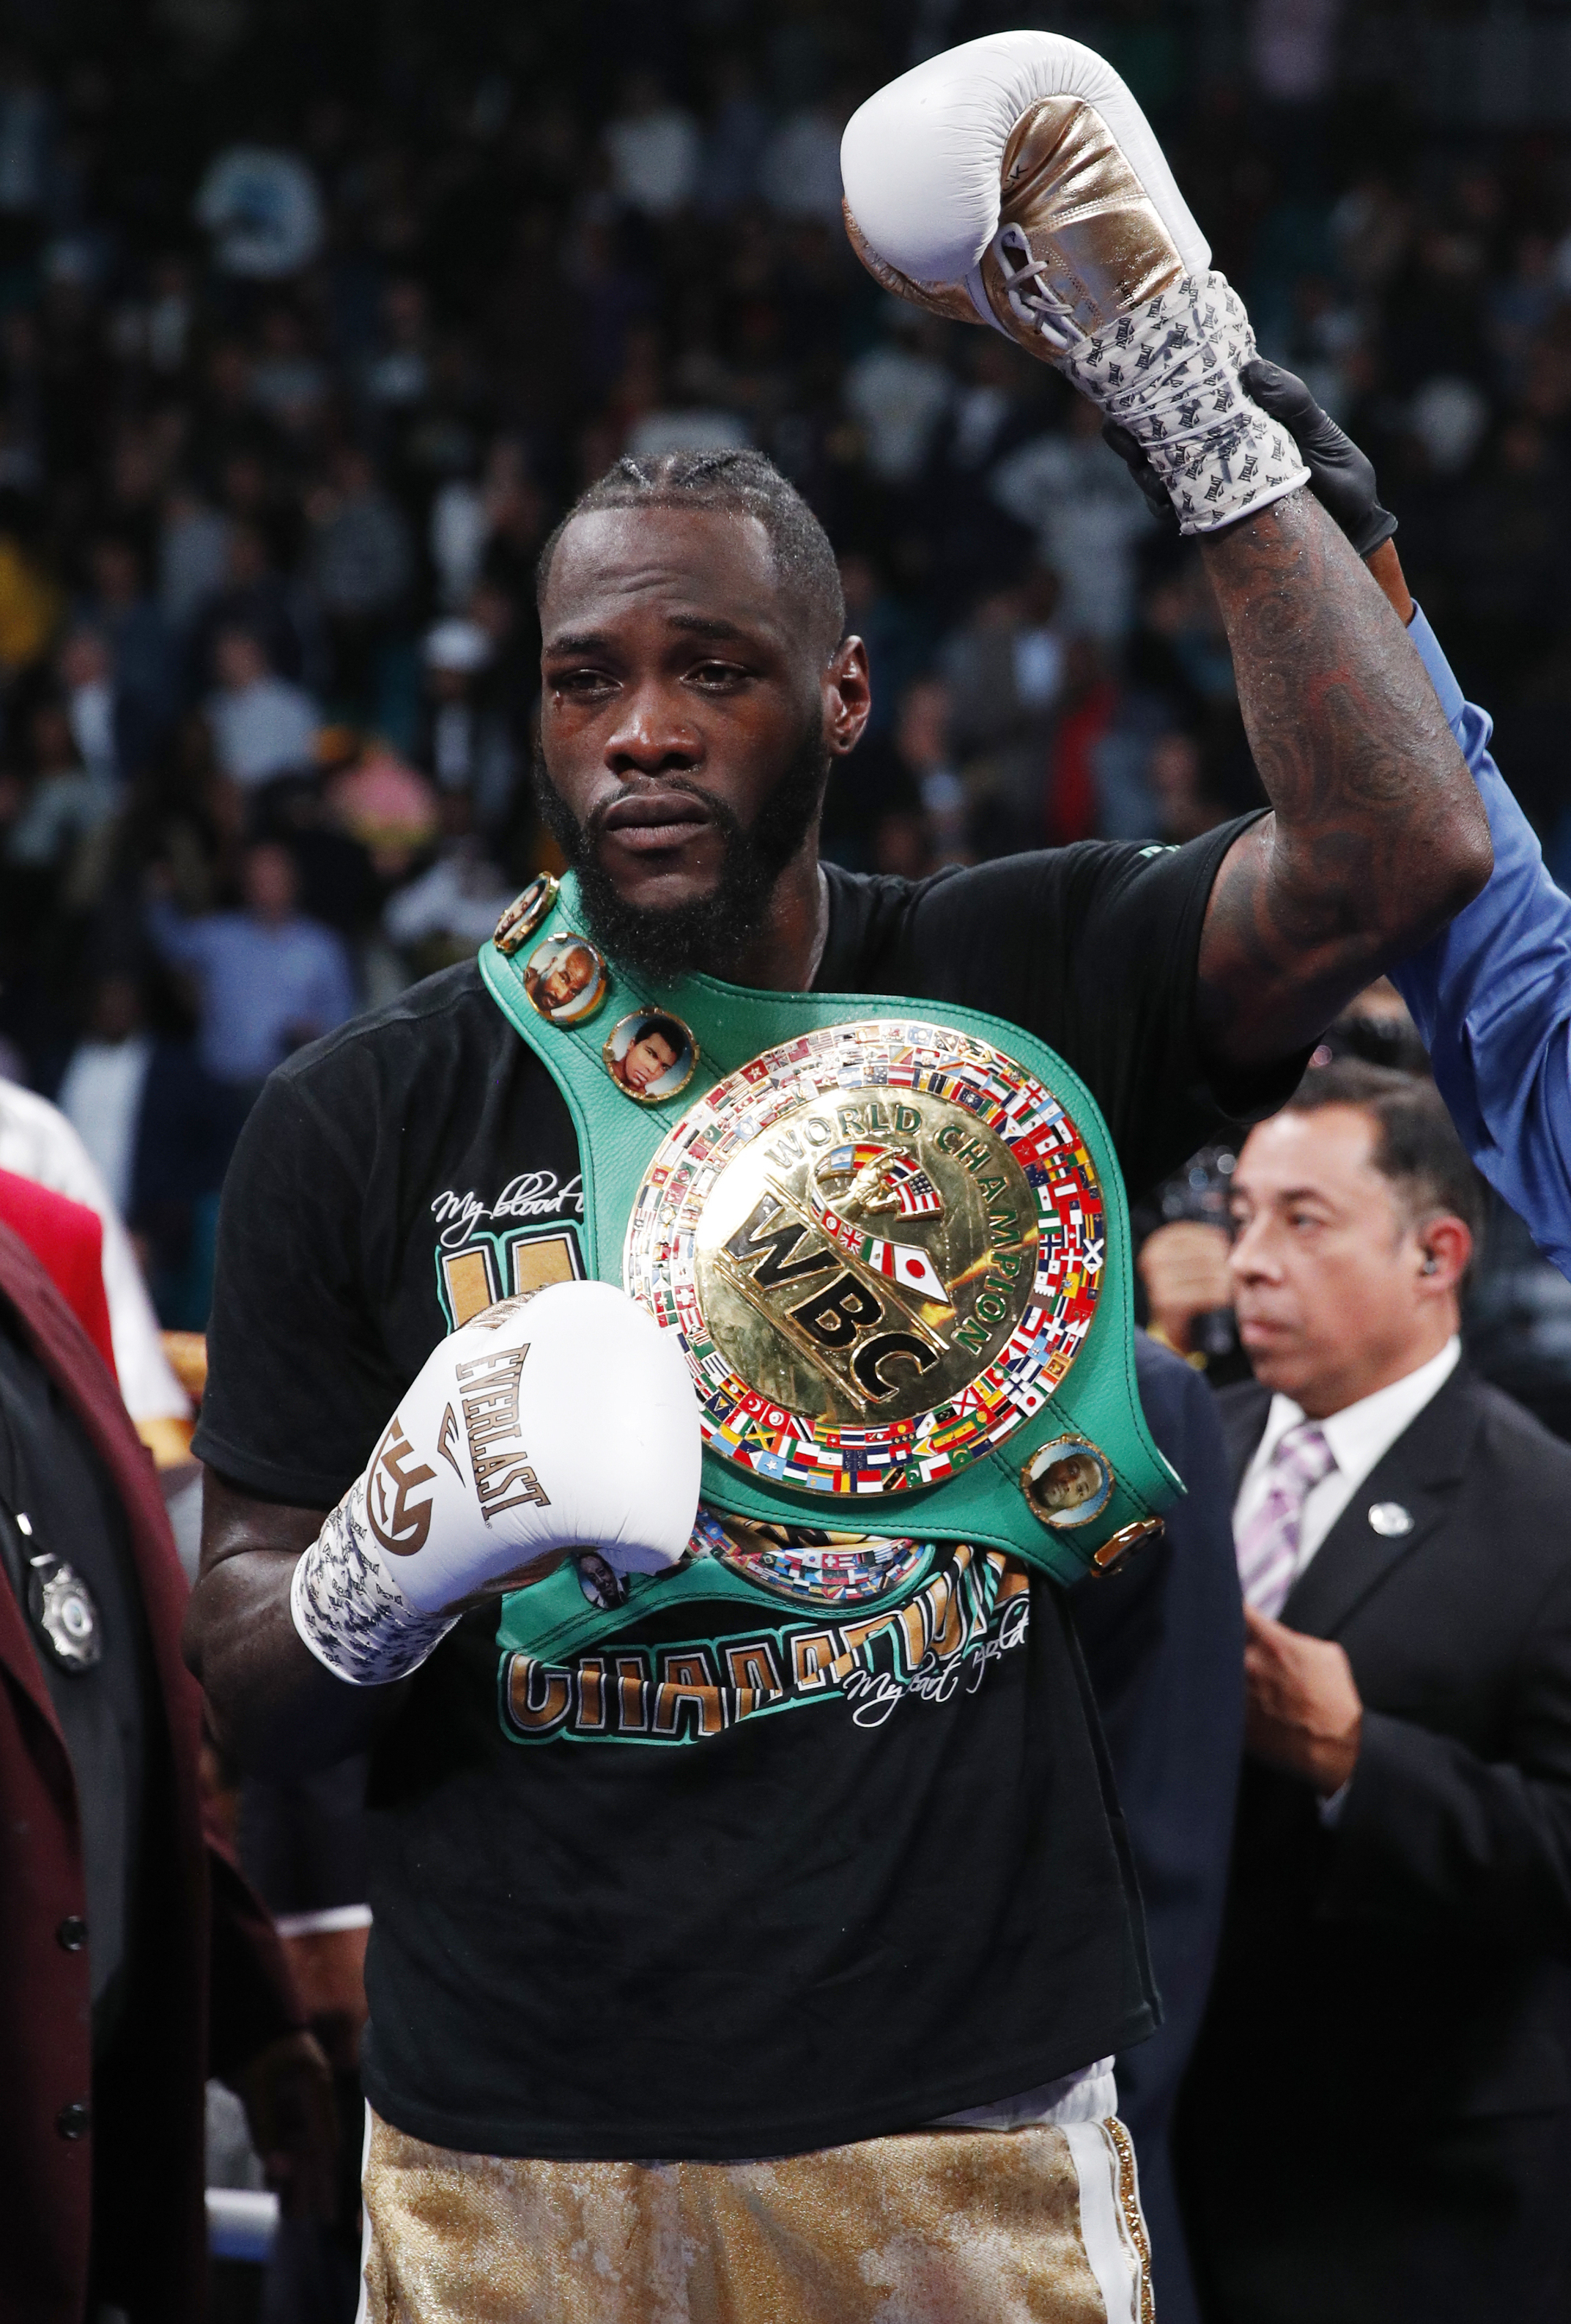 Deontay Wilder made £15.6million for defeating Luiz Ortiz in a 2020 rematch